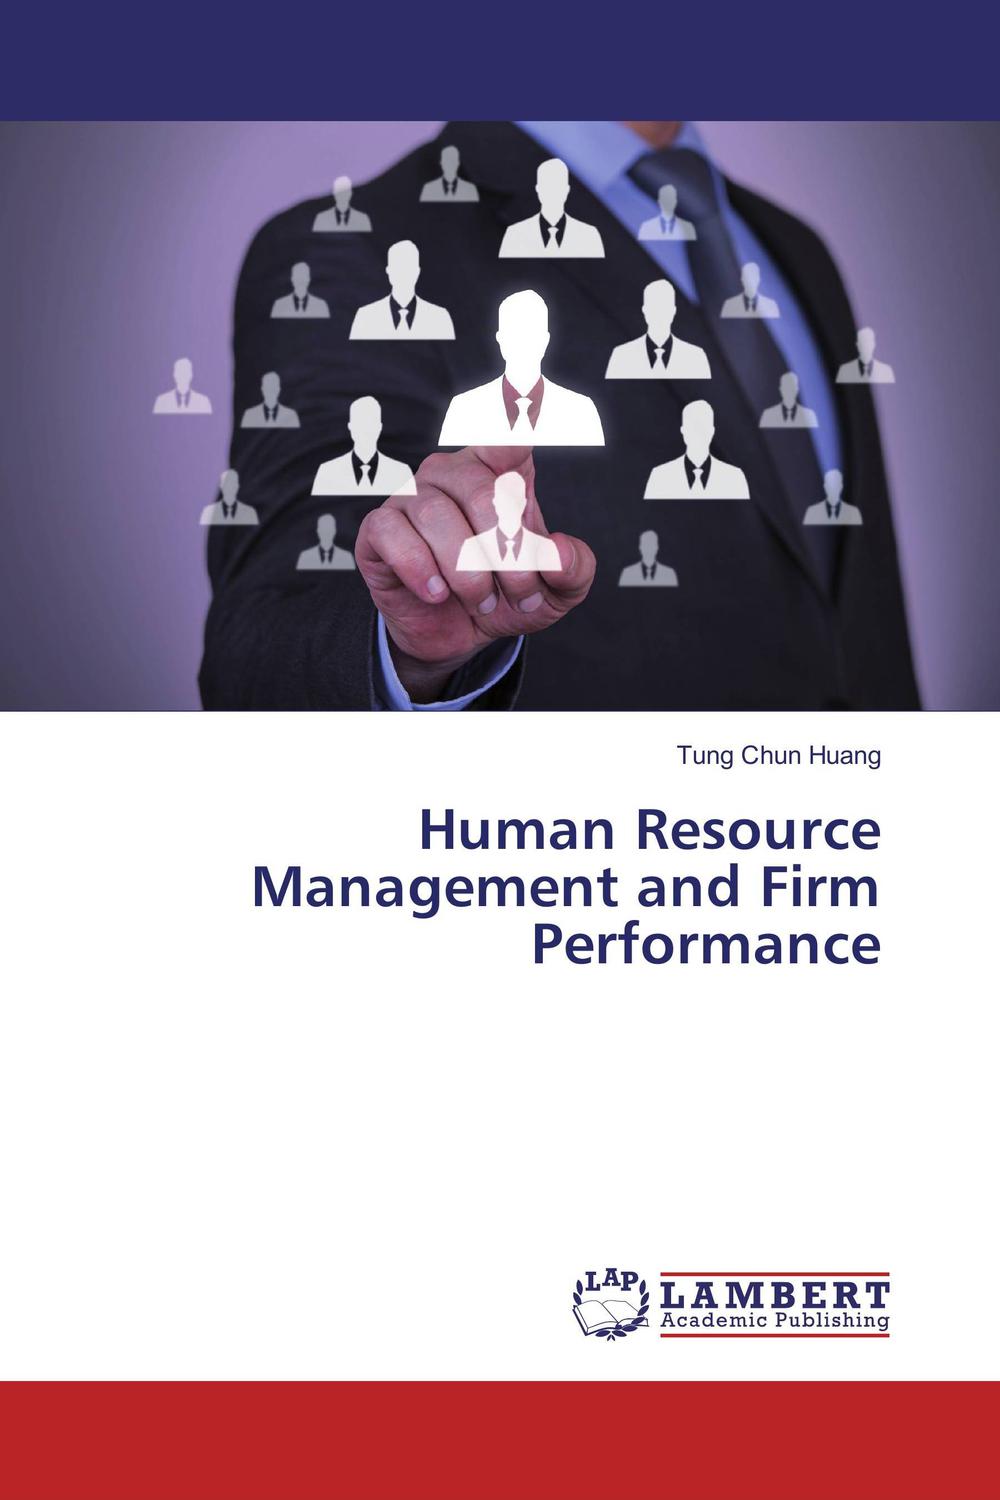 human resource management and firm performance 1st edition huang, tung chun 3659193828, 9783659193828